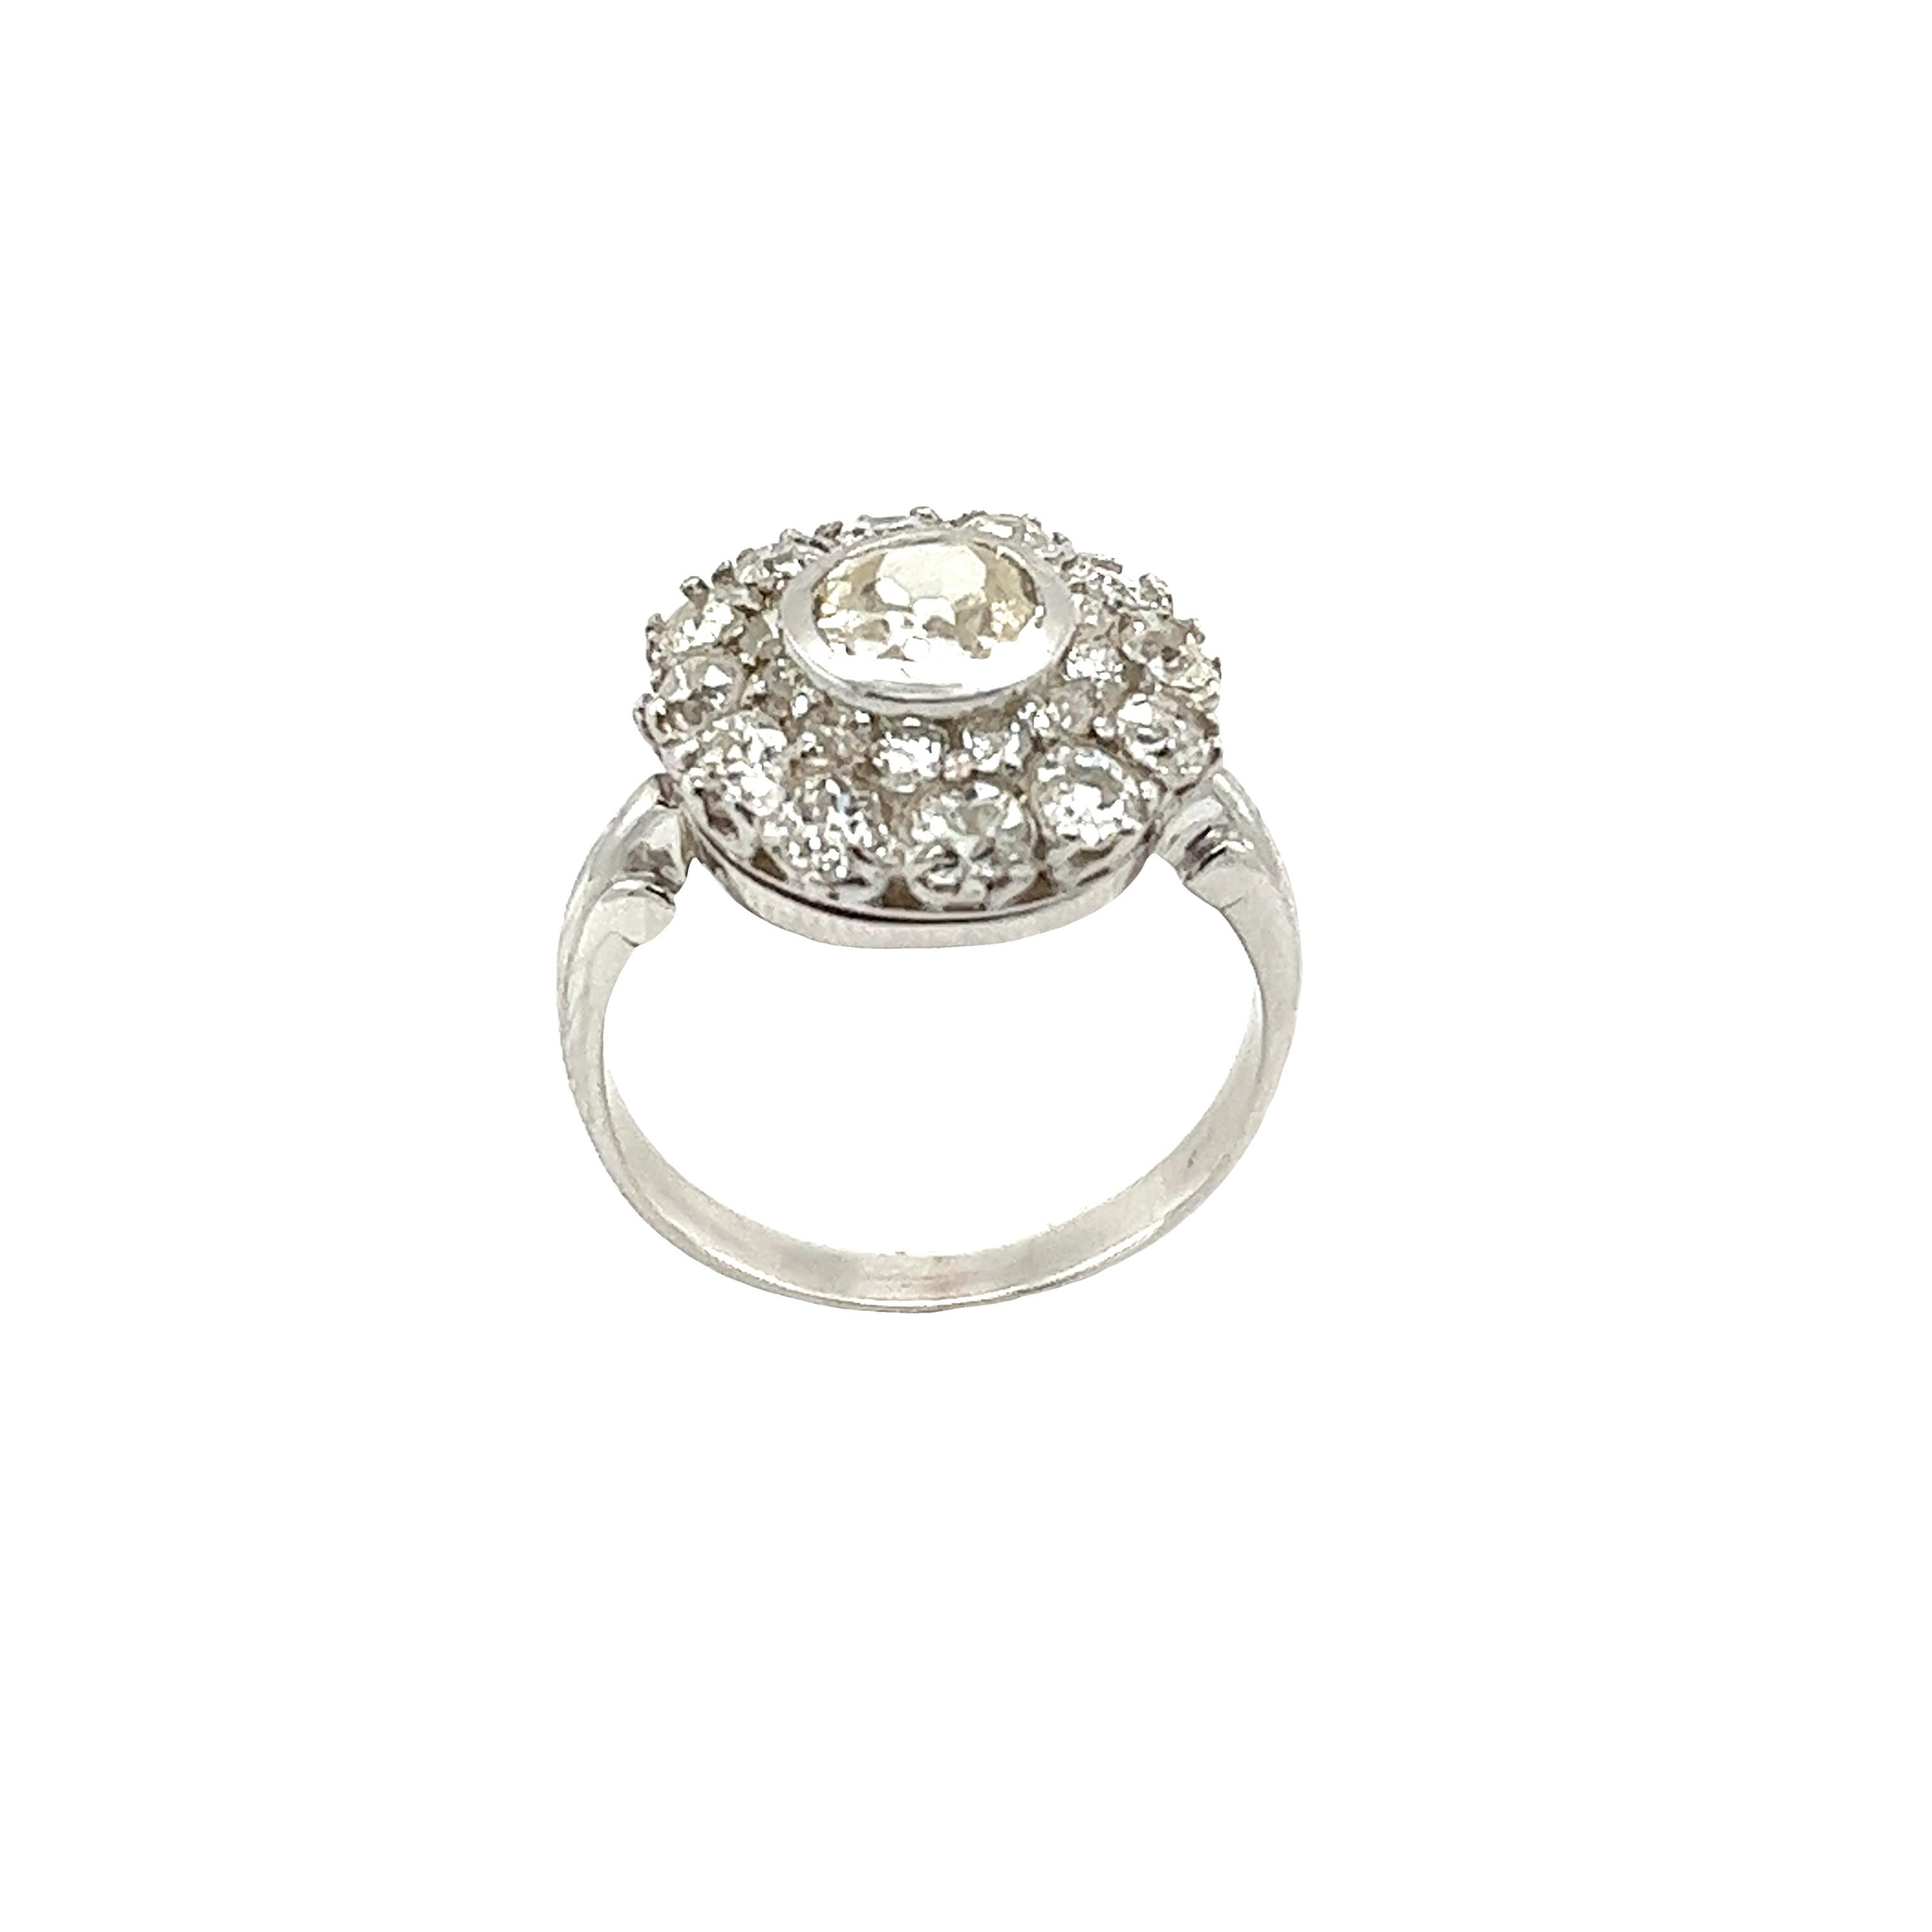 Vintage Italian Made Diamond Cluster Ring, Set With 2.37ct Victorian Diamonds In Excellent Condition For Sale In London, GB